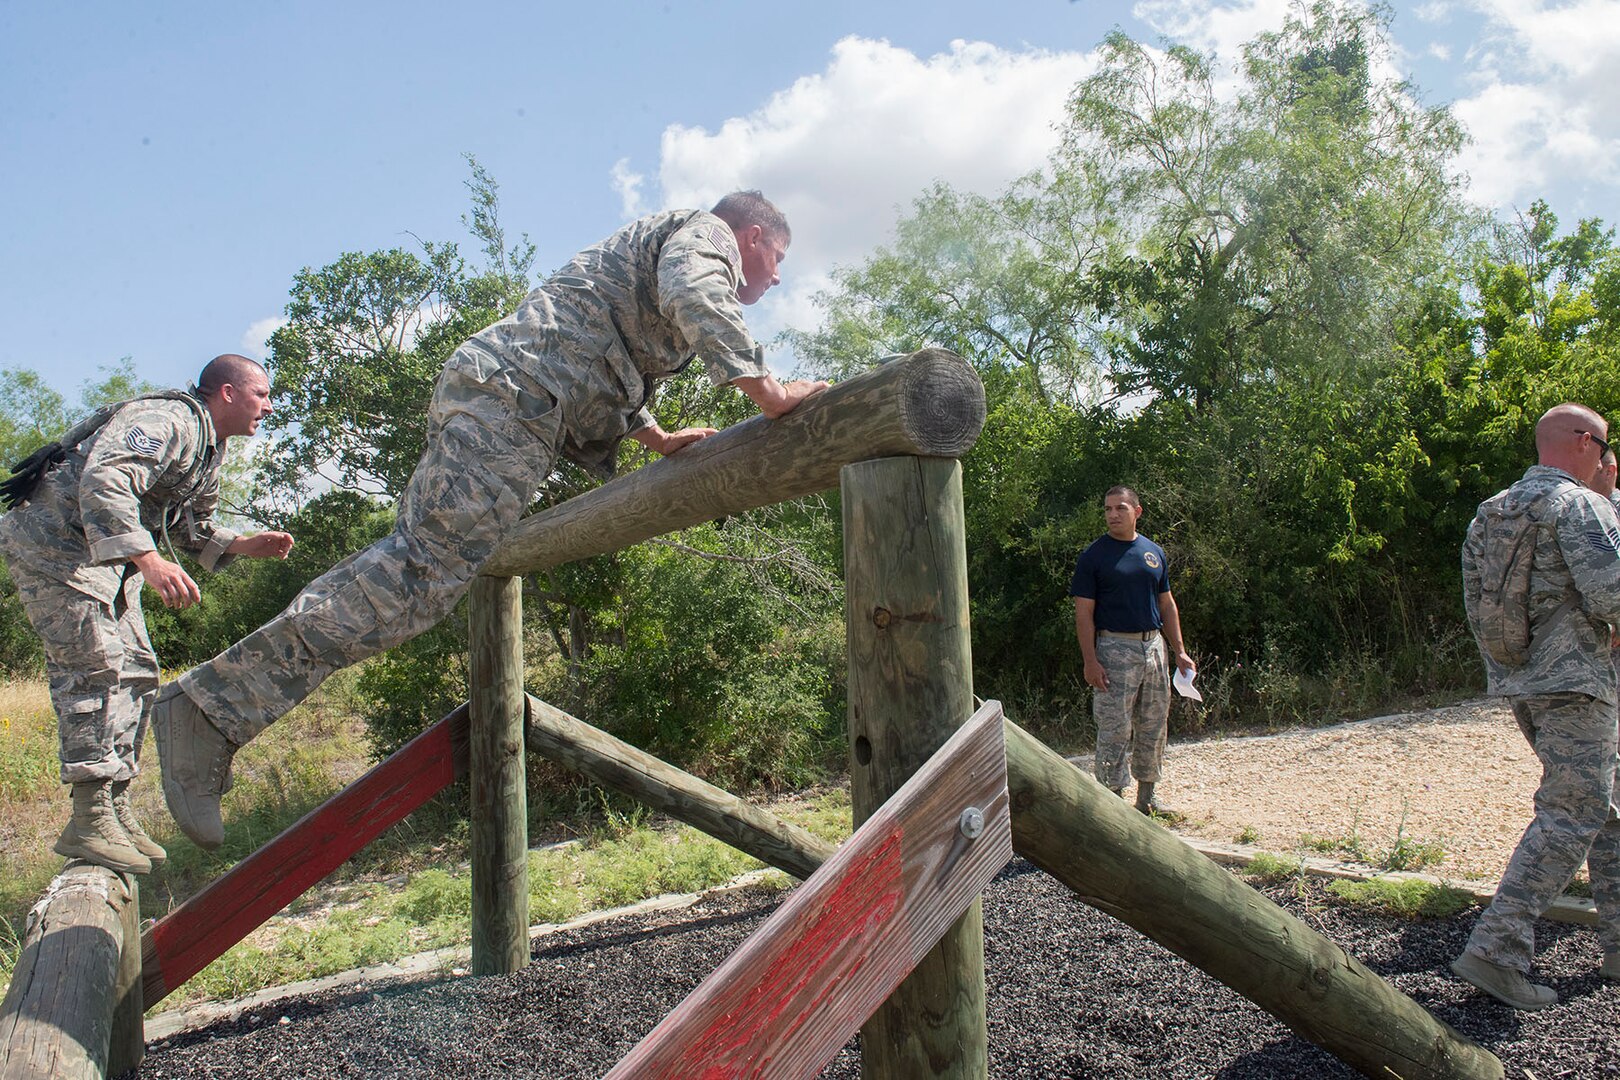 Members of the 802nd and 902 Security Forces Squadrons compete in the Obstacle Course Team Challenge May 15, 2017, at Joint Base San Antonio-Lackland, Texas Medina Annex. The event was held as part of National Police Week, an annual celebration to honor the service and sacrifice of law enforcement members and pays special tribute to law enforcement officers who have lost their lives in the line of duty for the safety and protection of others. JBSA security forces members participated participate in events weeklong May 15-19 across the installations. (U.S. Air Force photo by Staff Sgt. Marissa Garner)